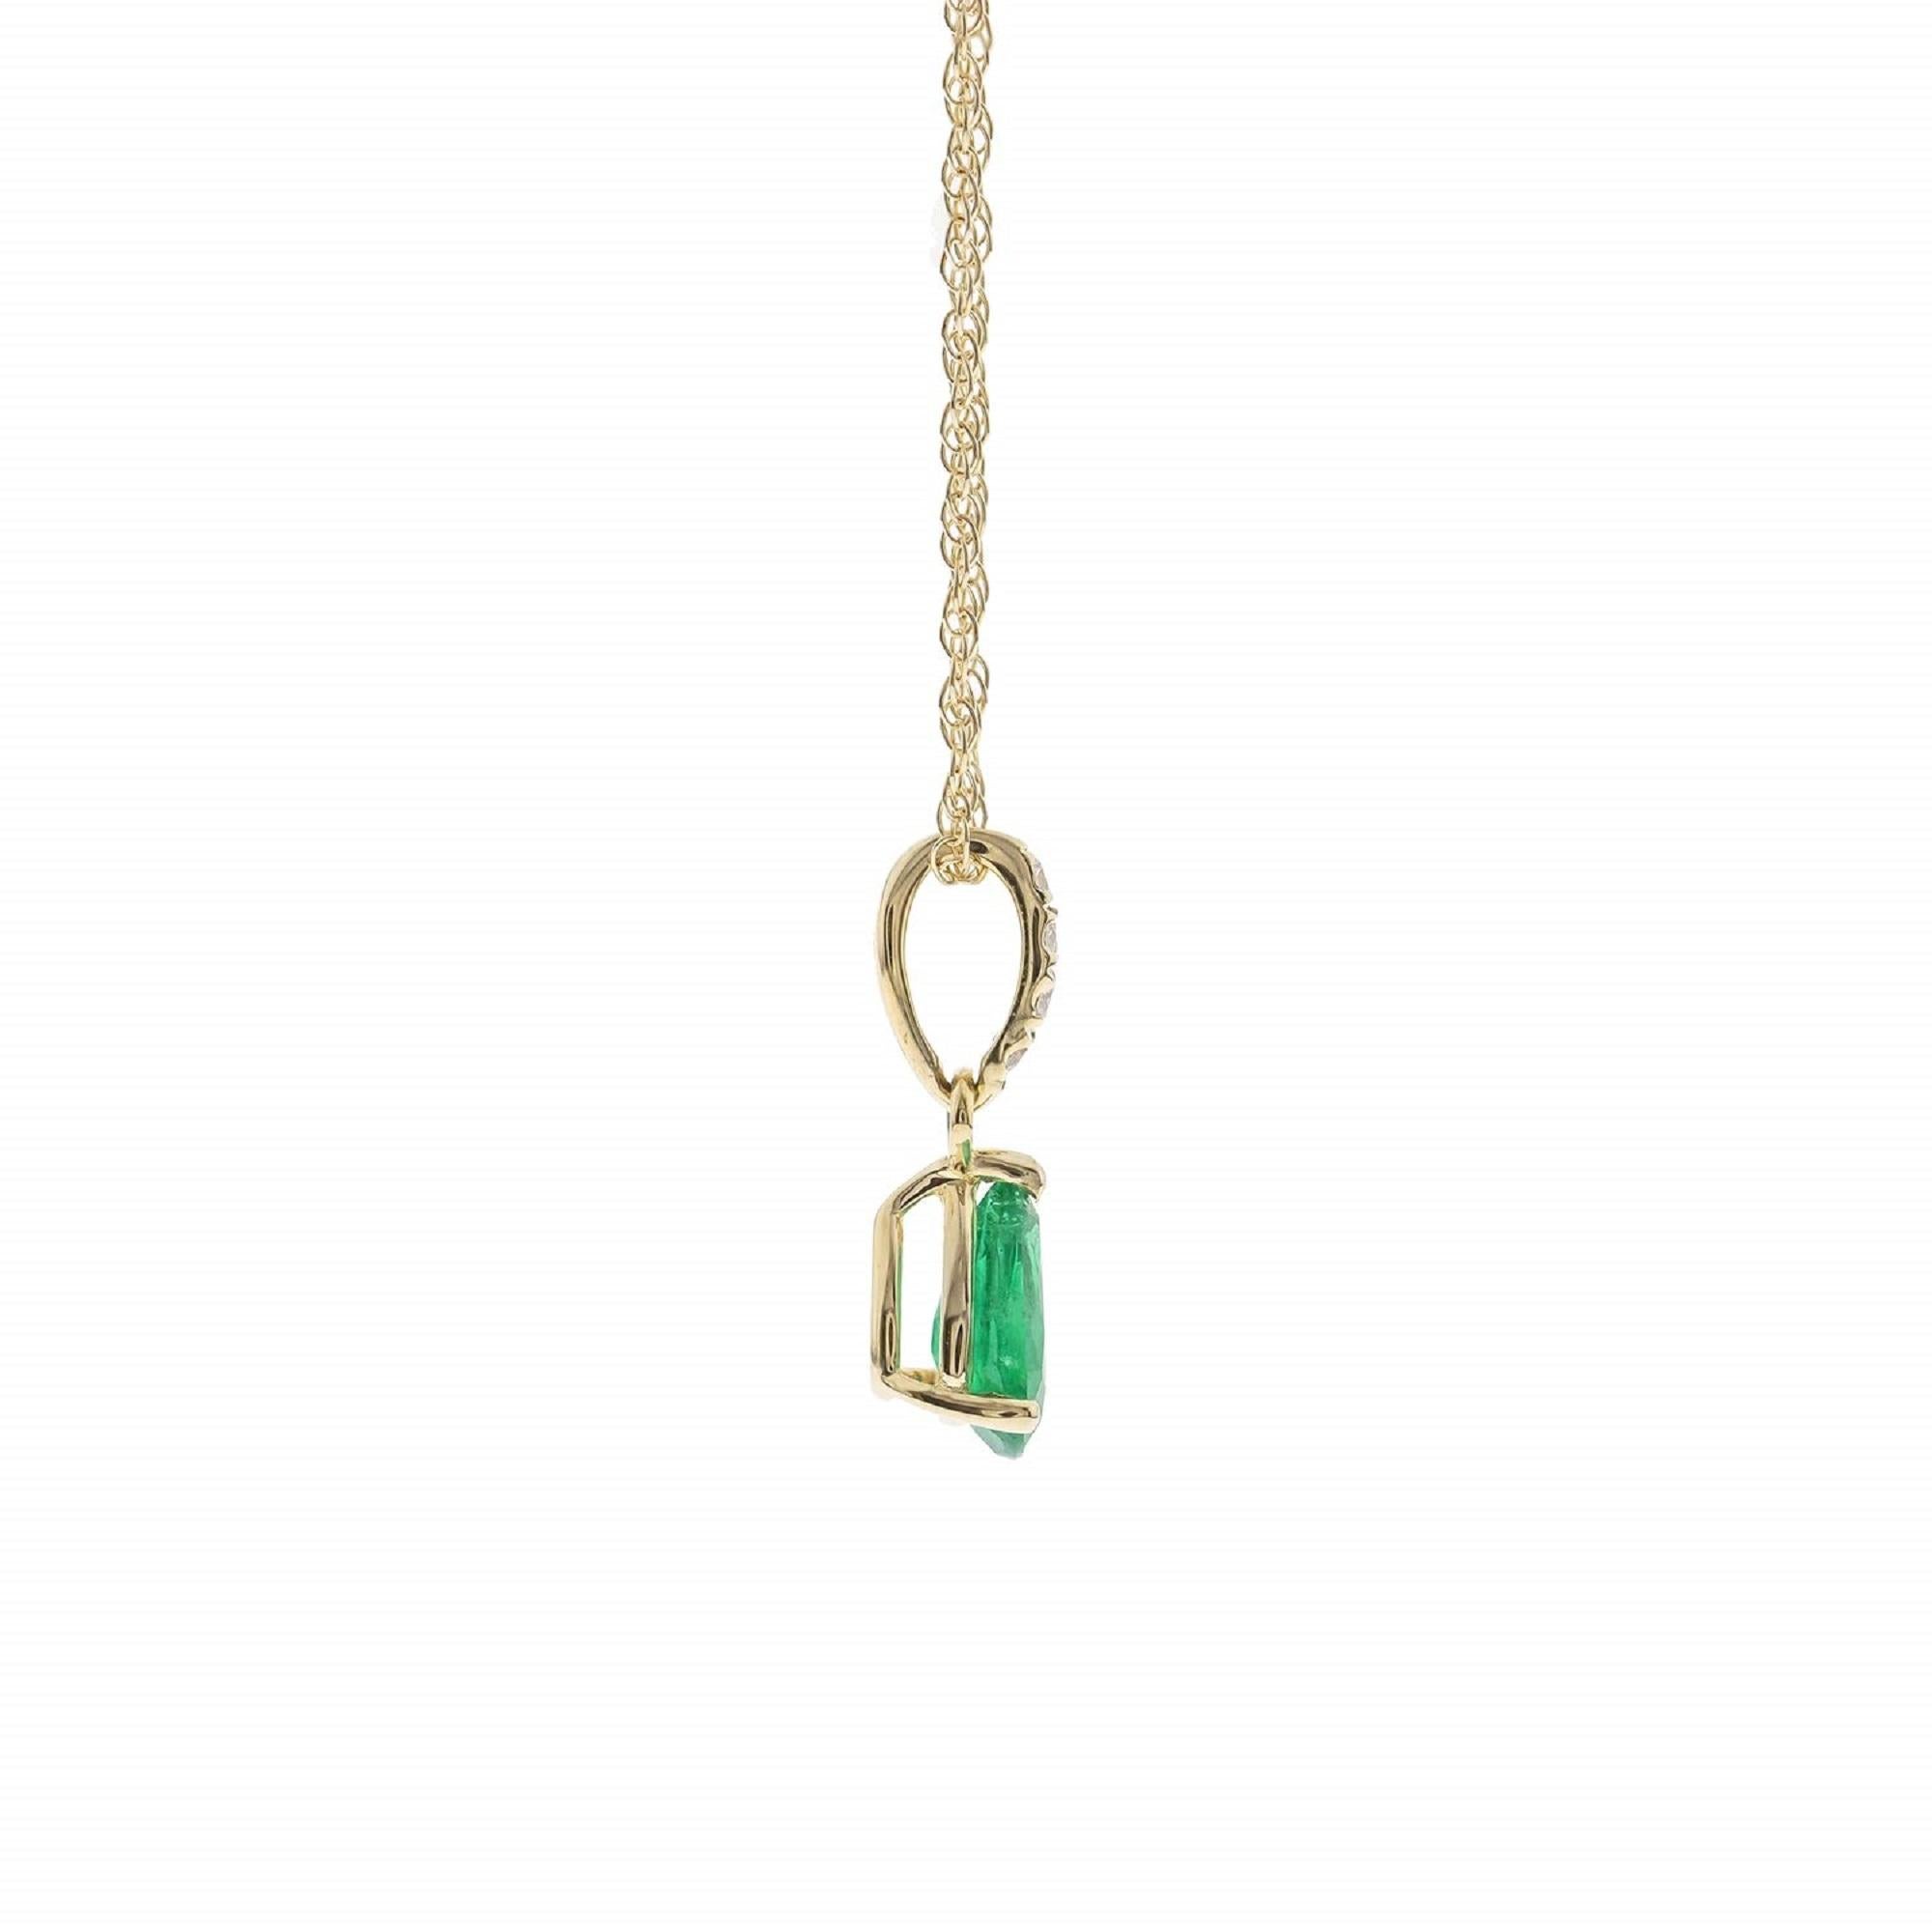 Stunning, timeless and classy eternity Unique Pendant. Decorate yourself in luxury with this Gin & Grace pendant. This pendant is made up of pear-Cut Prong Setting Emerald (1 pcs) 0.33 Carat and Round-Cut Prong Setting Diamond (4 pcs) 0.03 Carat